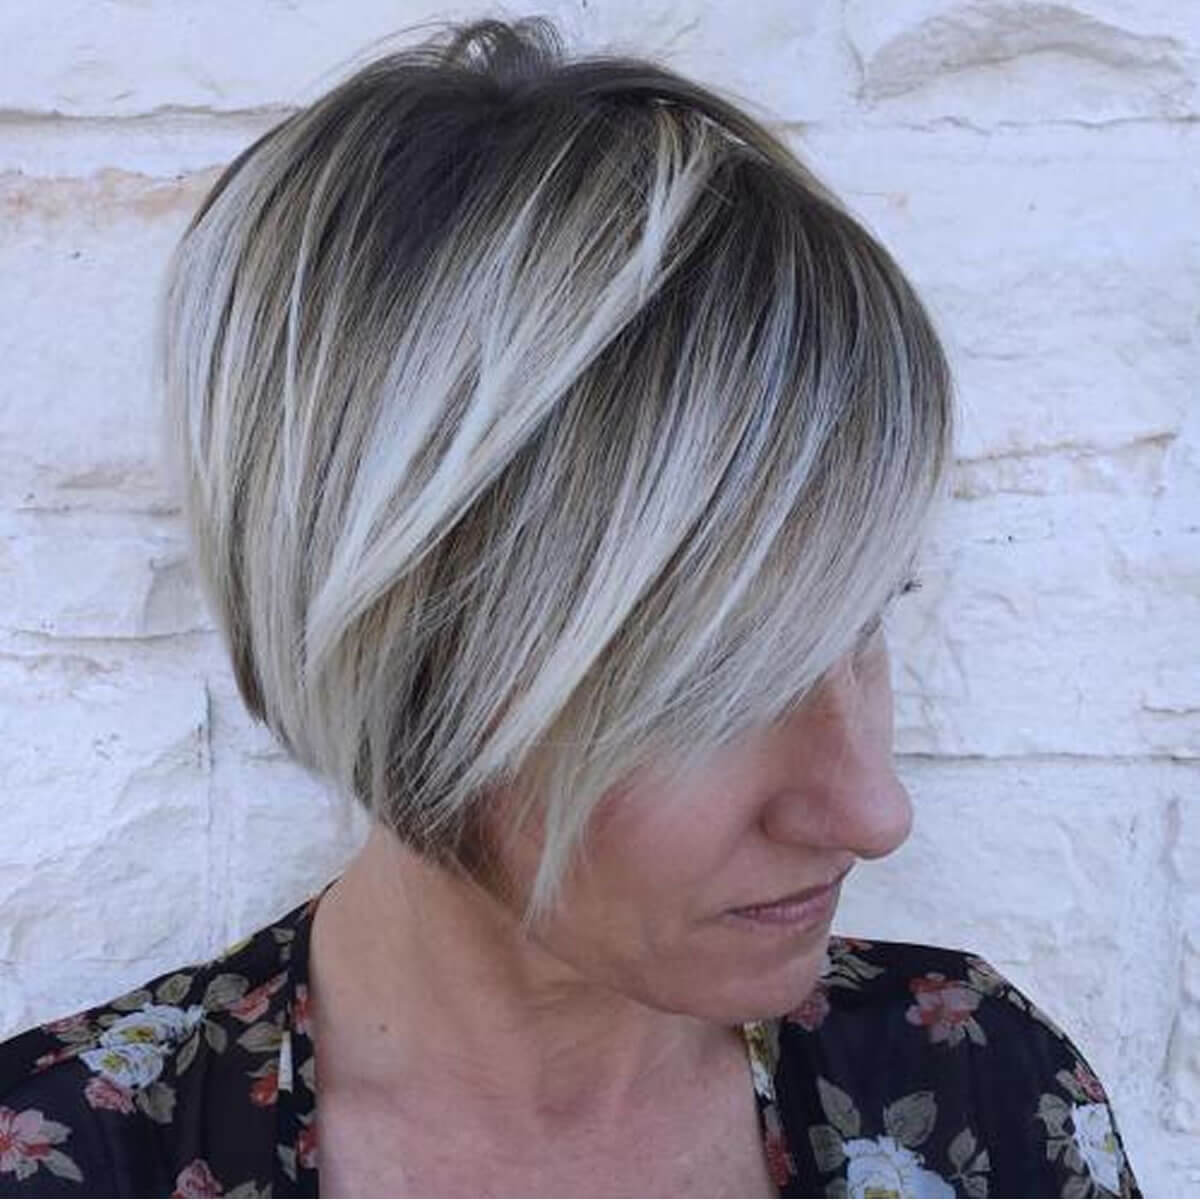 Hairstyles for Women Over 50 With Highlights